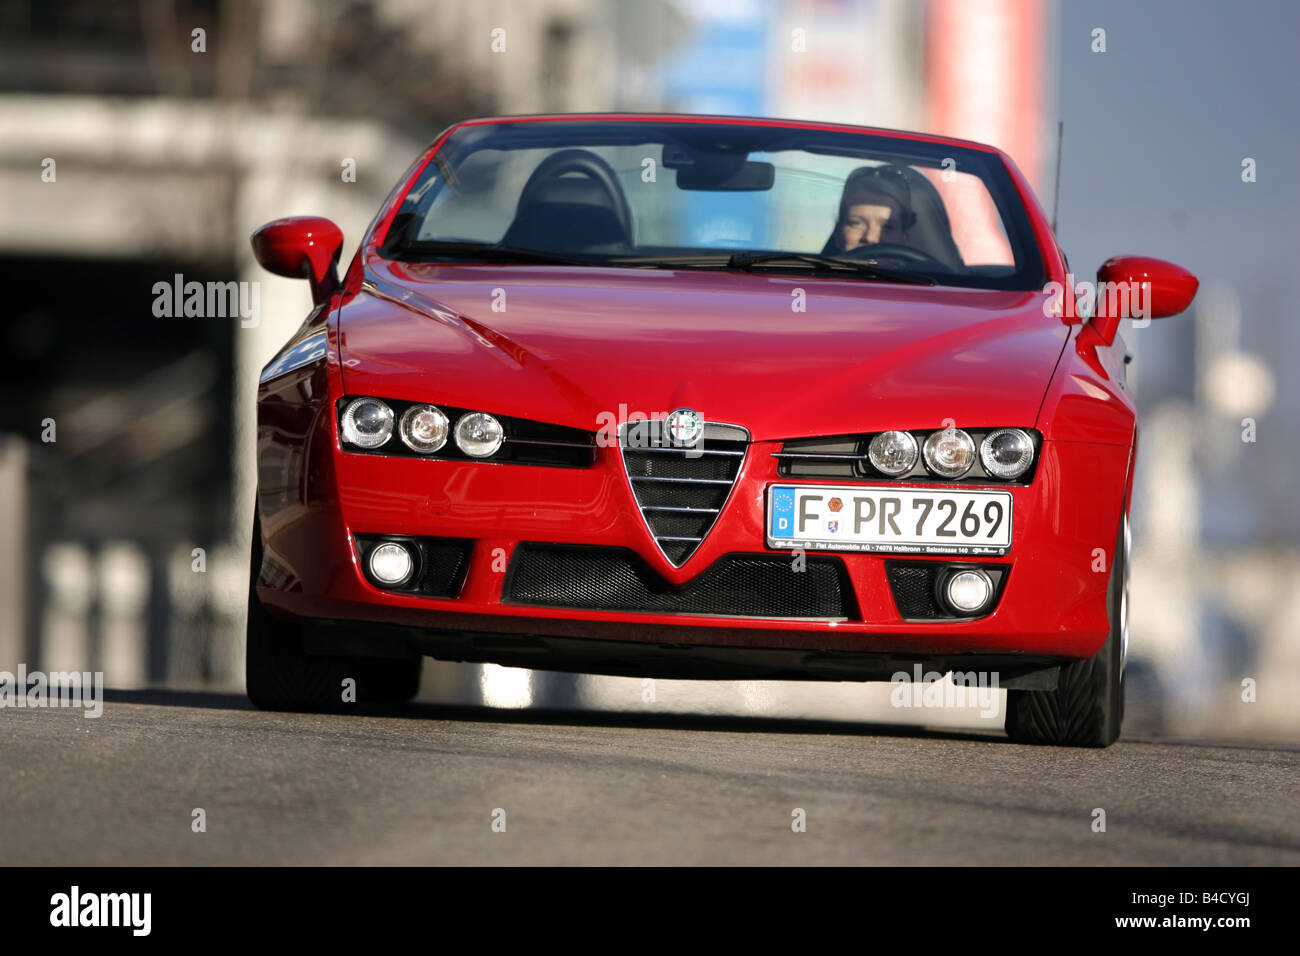 Alfa Romeo Spider 2.2 JTS Exclusive, model year 2007-, red, driving, frontal view, City, open top Stock Photo